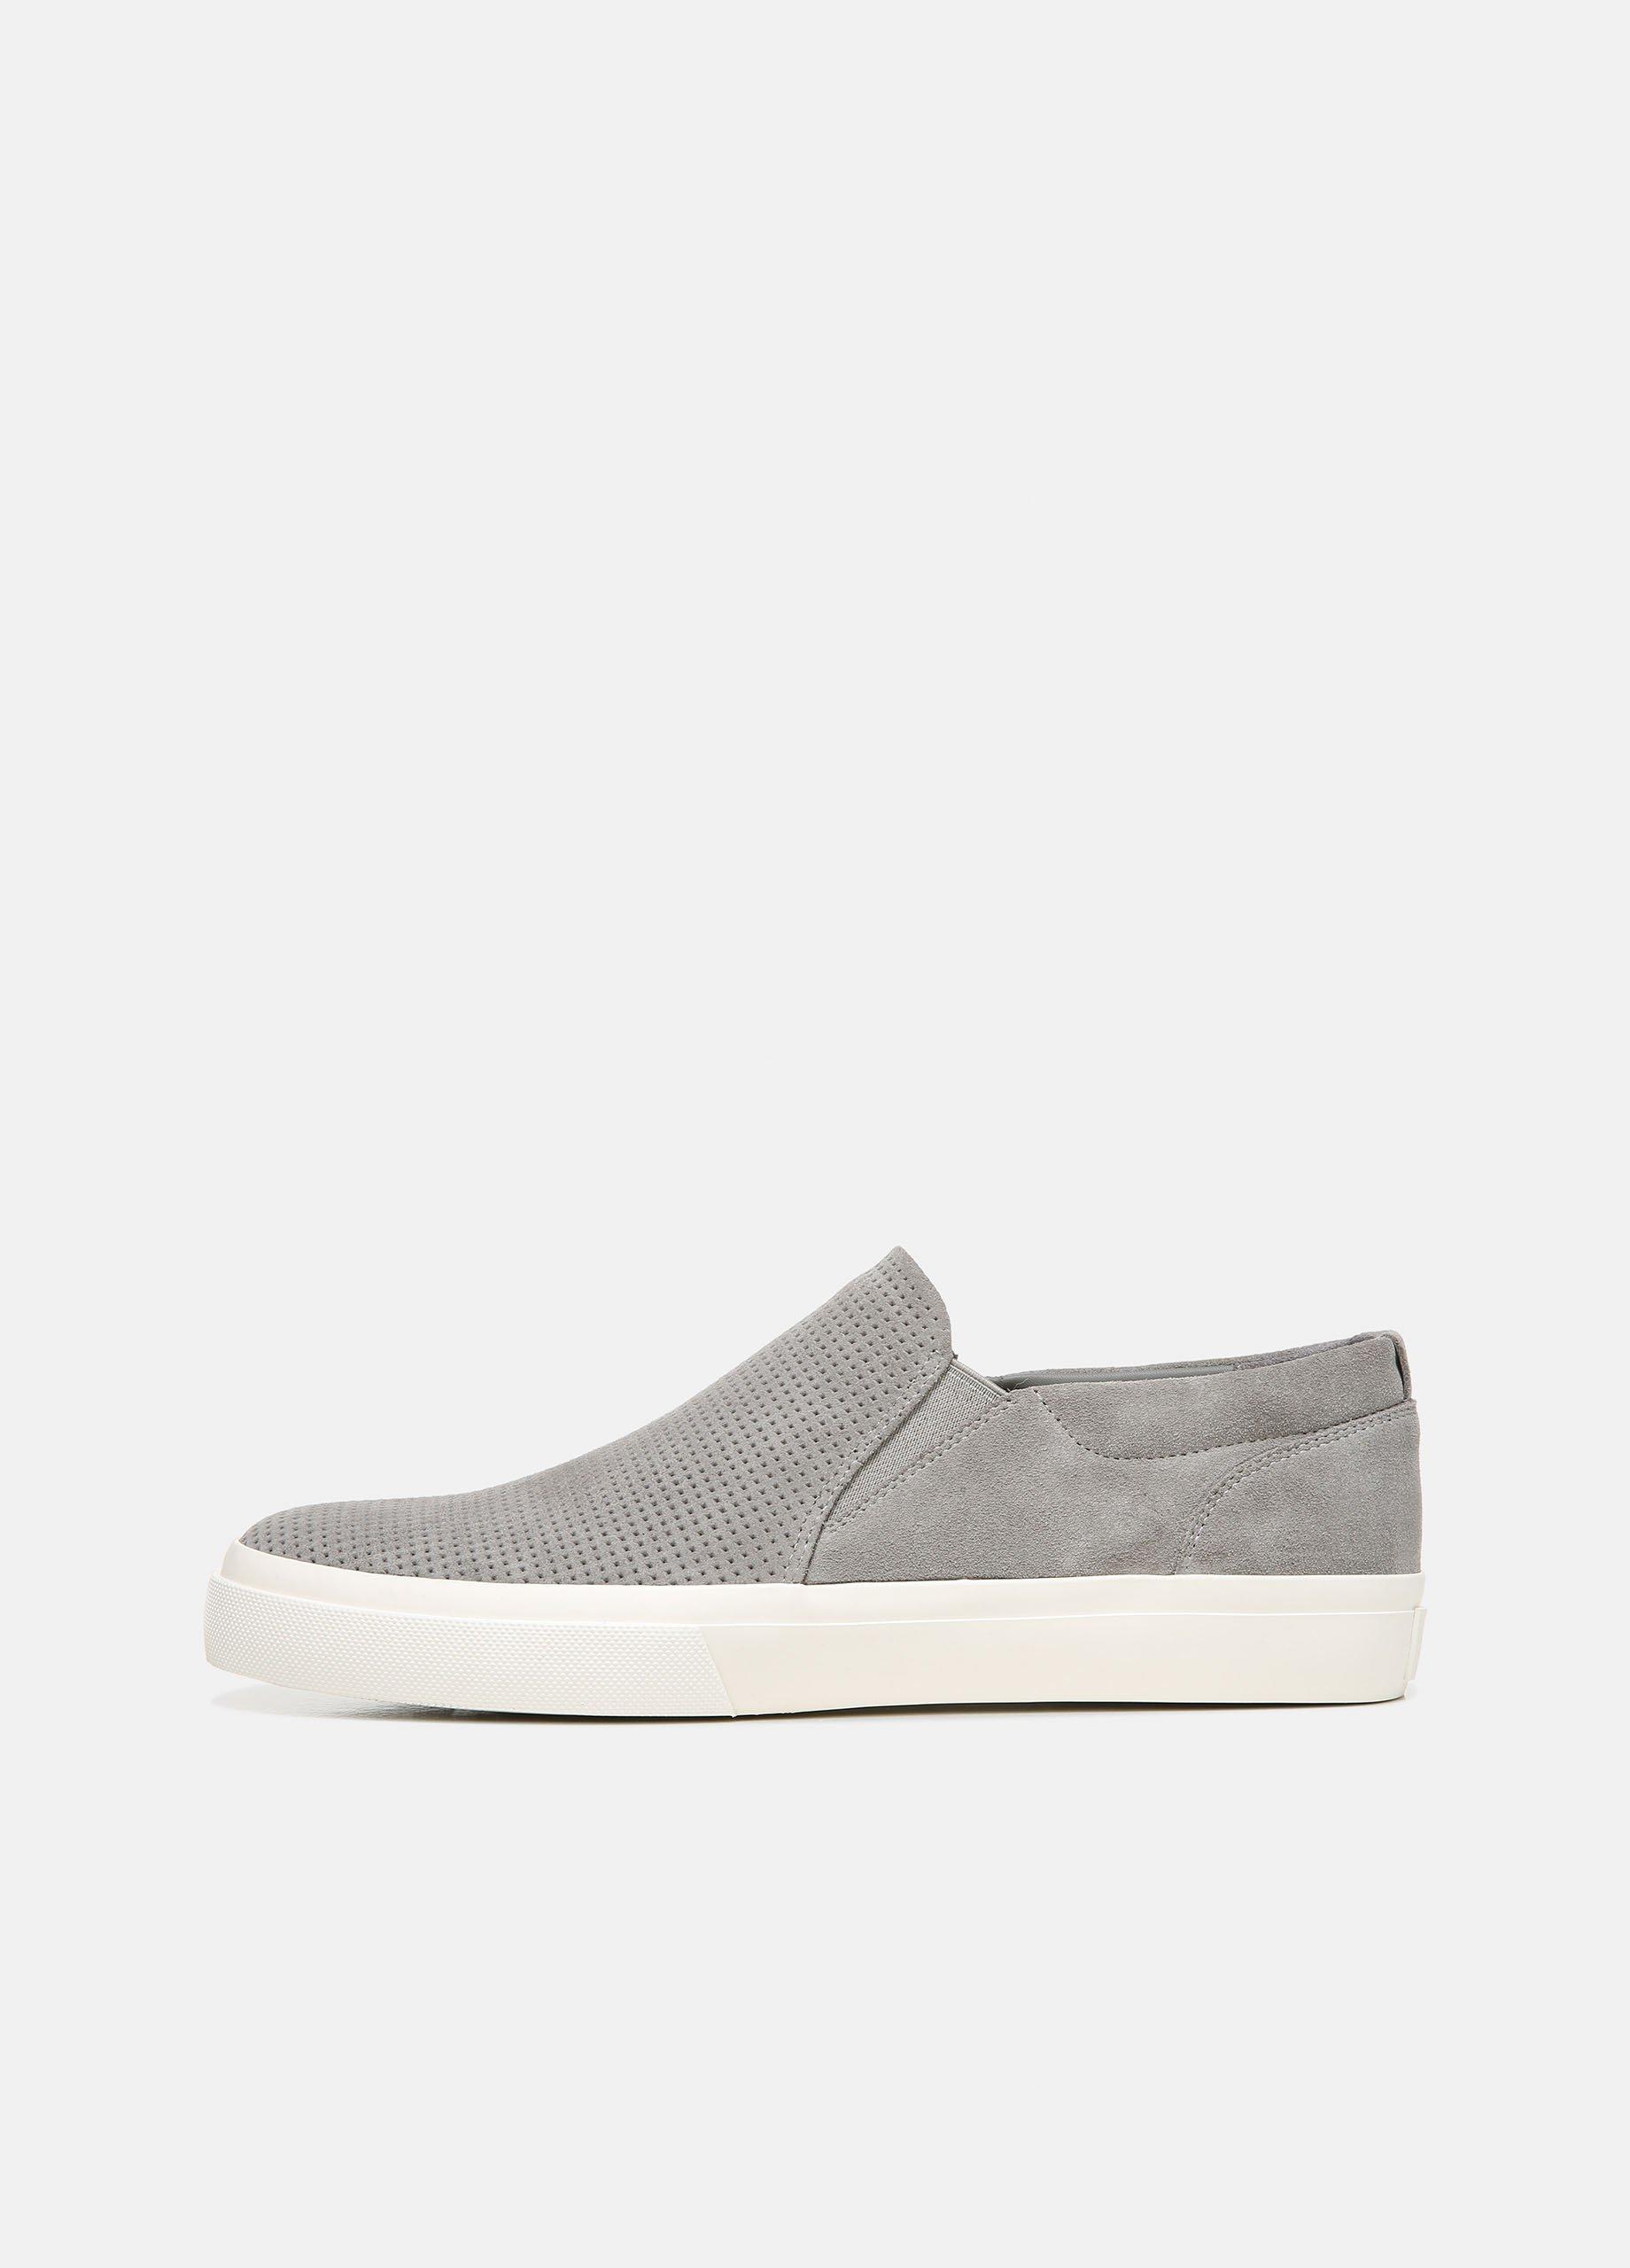 Fletcher Perforated Suede Sneaker